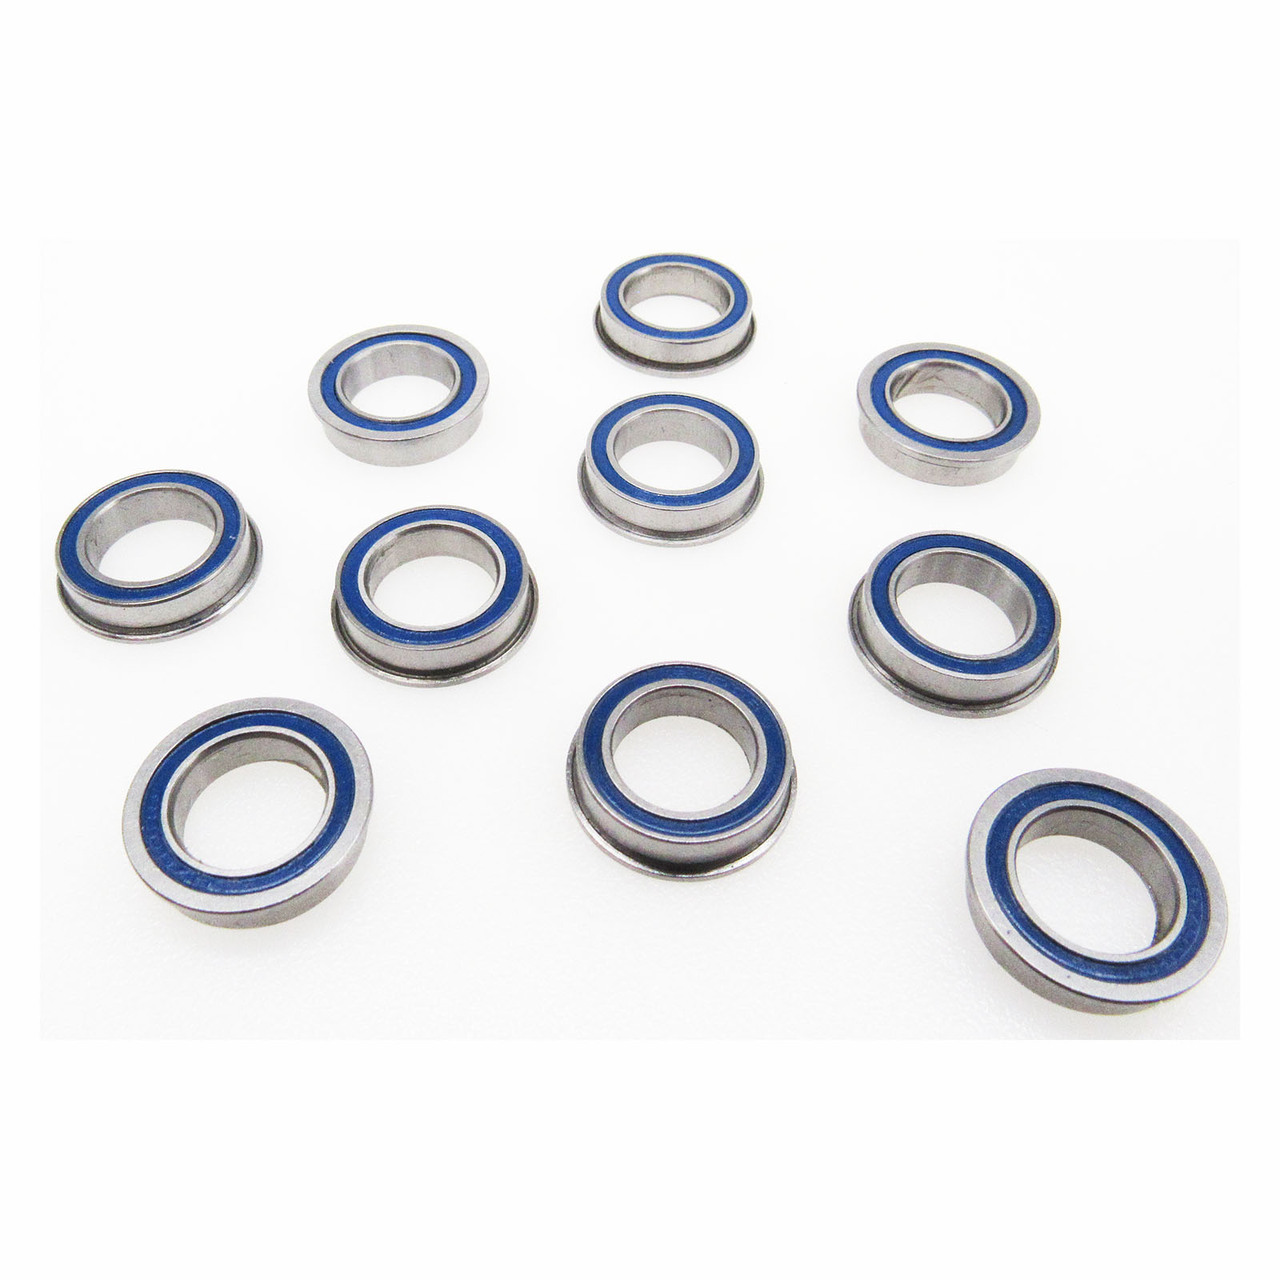 F6700-2RS 10x15x4mm Flanged Precision High Speed RC Car Ball Bearing, Chrome Steel with Blue Rubber Seals ABEC-1 ABEC-3 ABEC-5